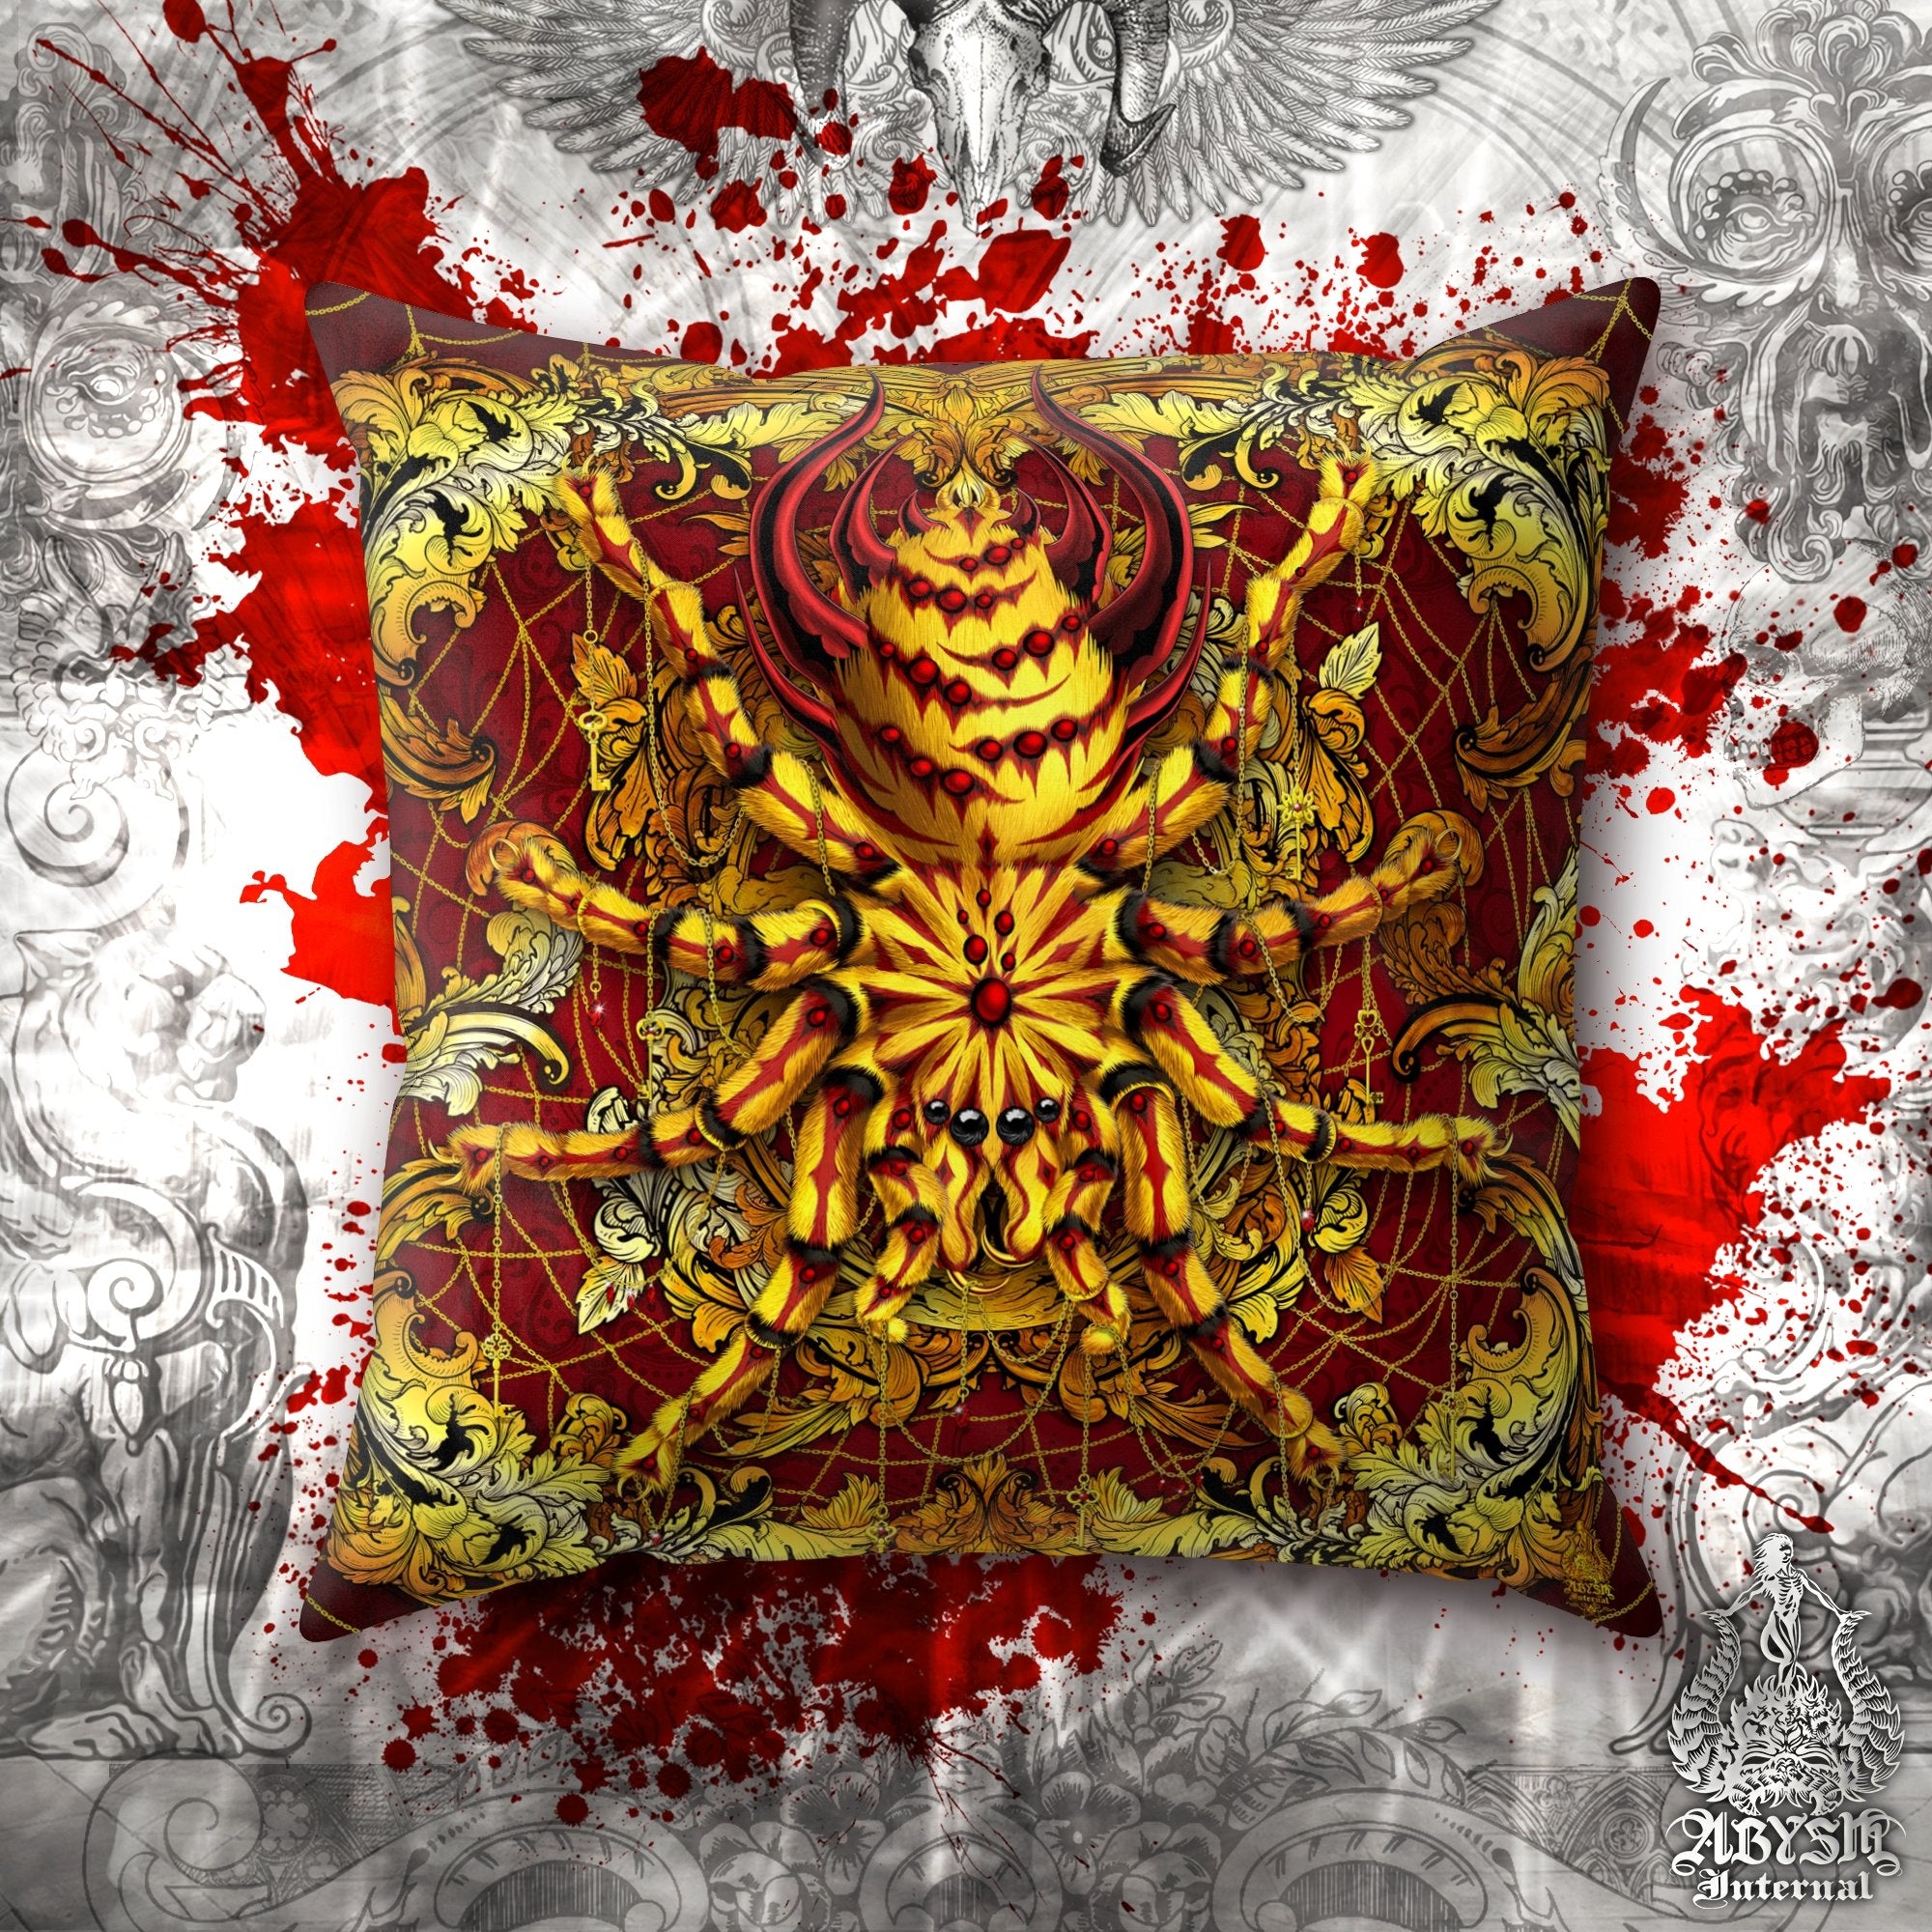 Spider Throw Pillow, Decorative Accent Cushion, Eclectic Room Decor, Alternative and Funky Home - Tarantula, Gold Red - Abysm Internal